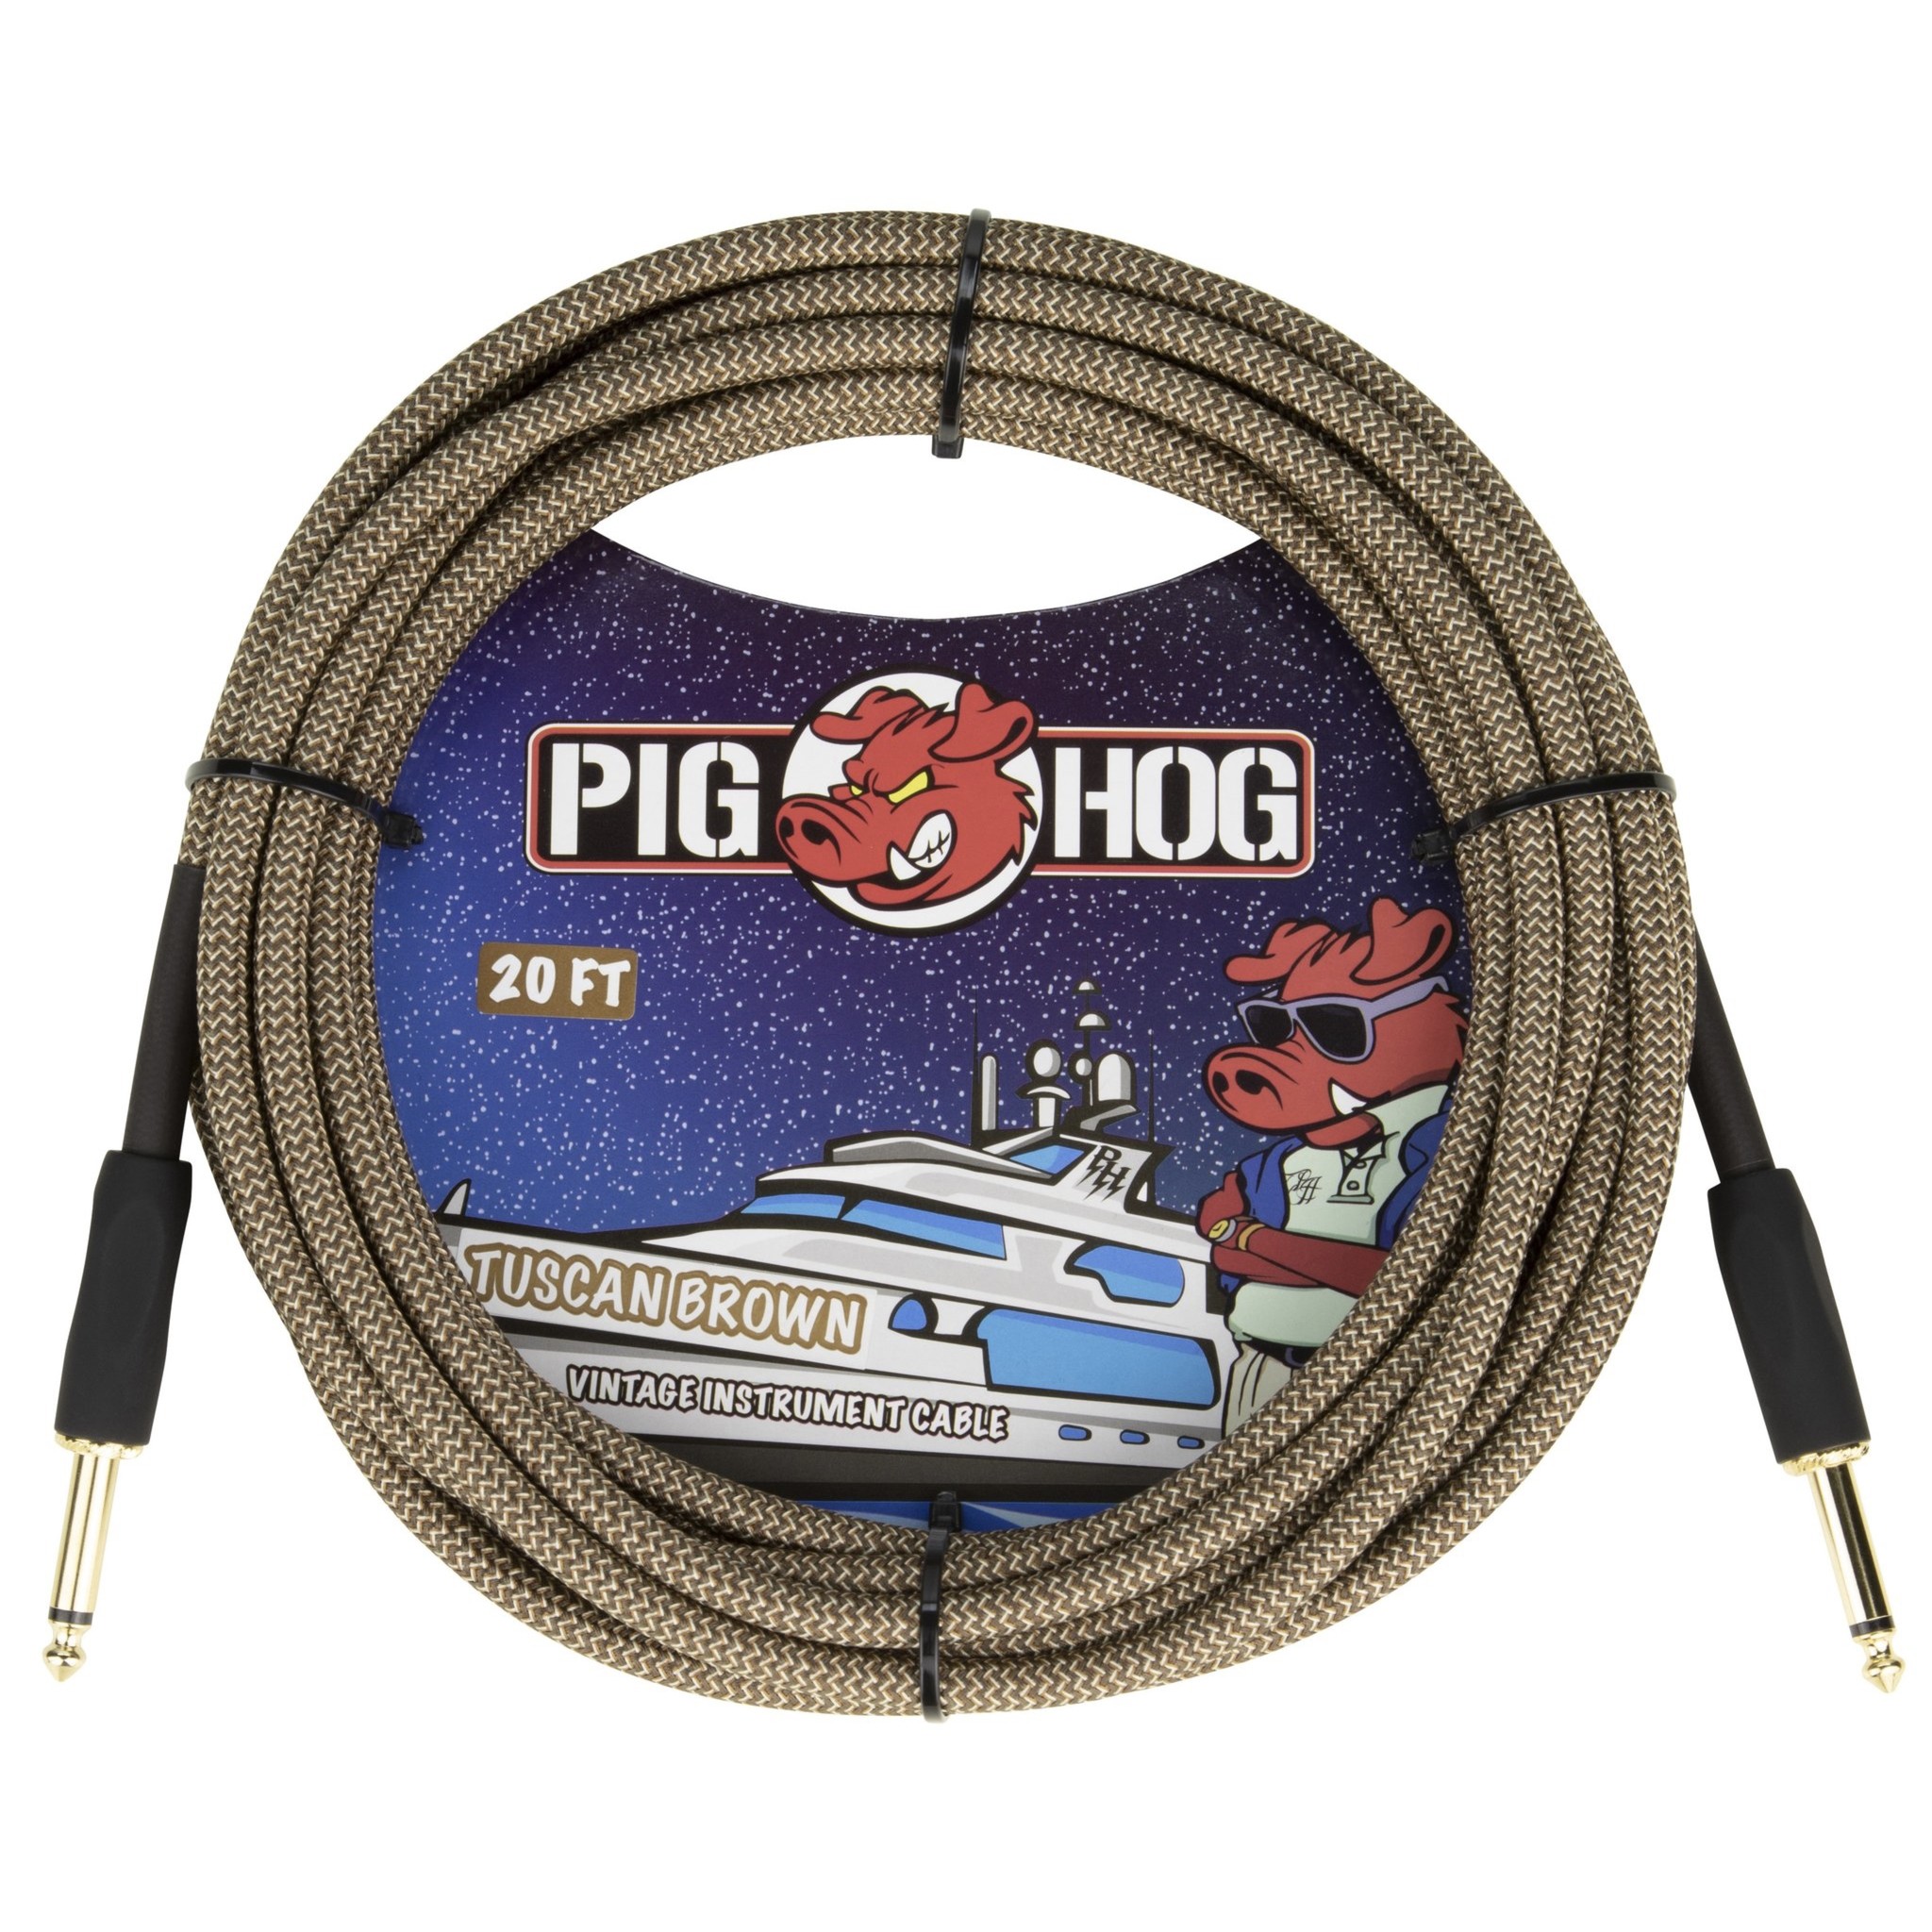 Pig Hog 20-Foot Vintage Woven Instrument Cable, 1/4" Straight-Straight, Tuscan Brown